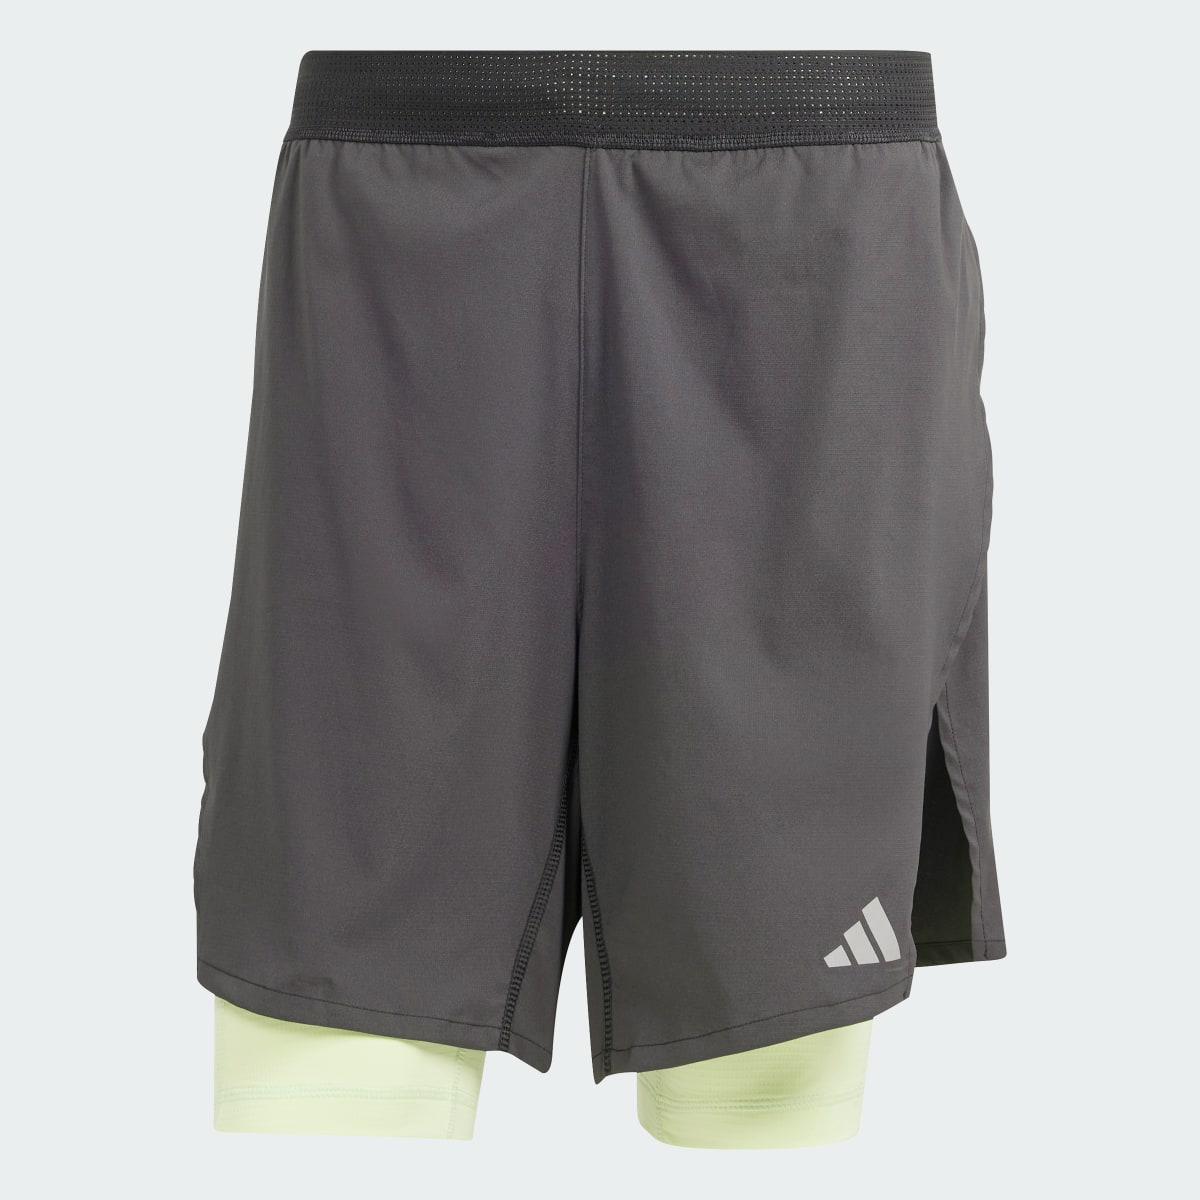 Adidas Szorty HIIT Workout HEAT.RDY 2-in-1. 4